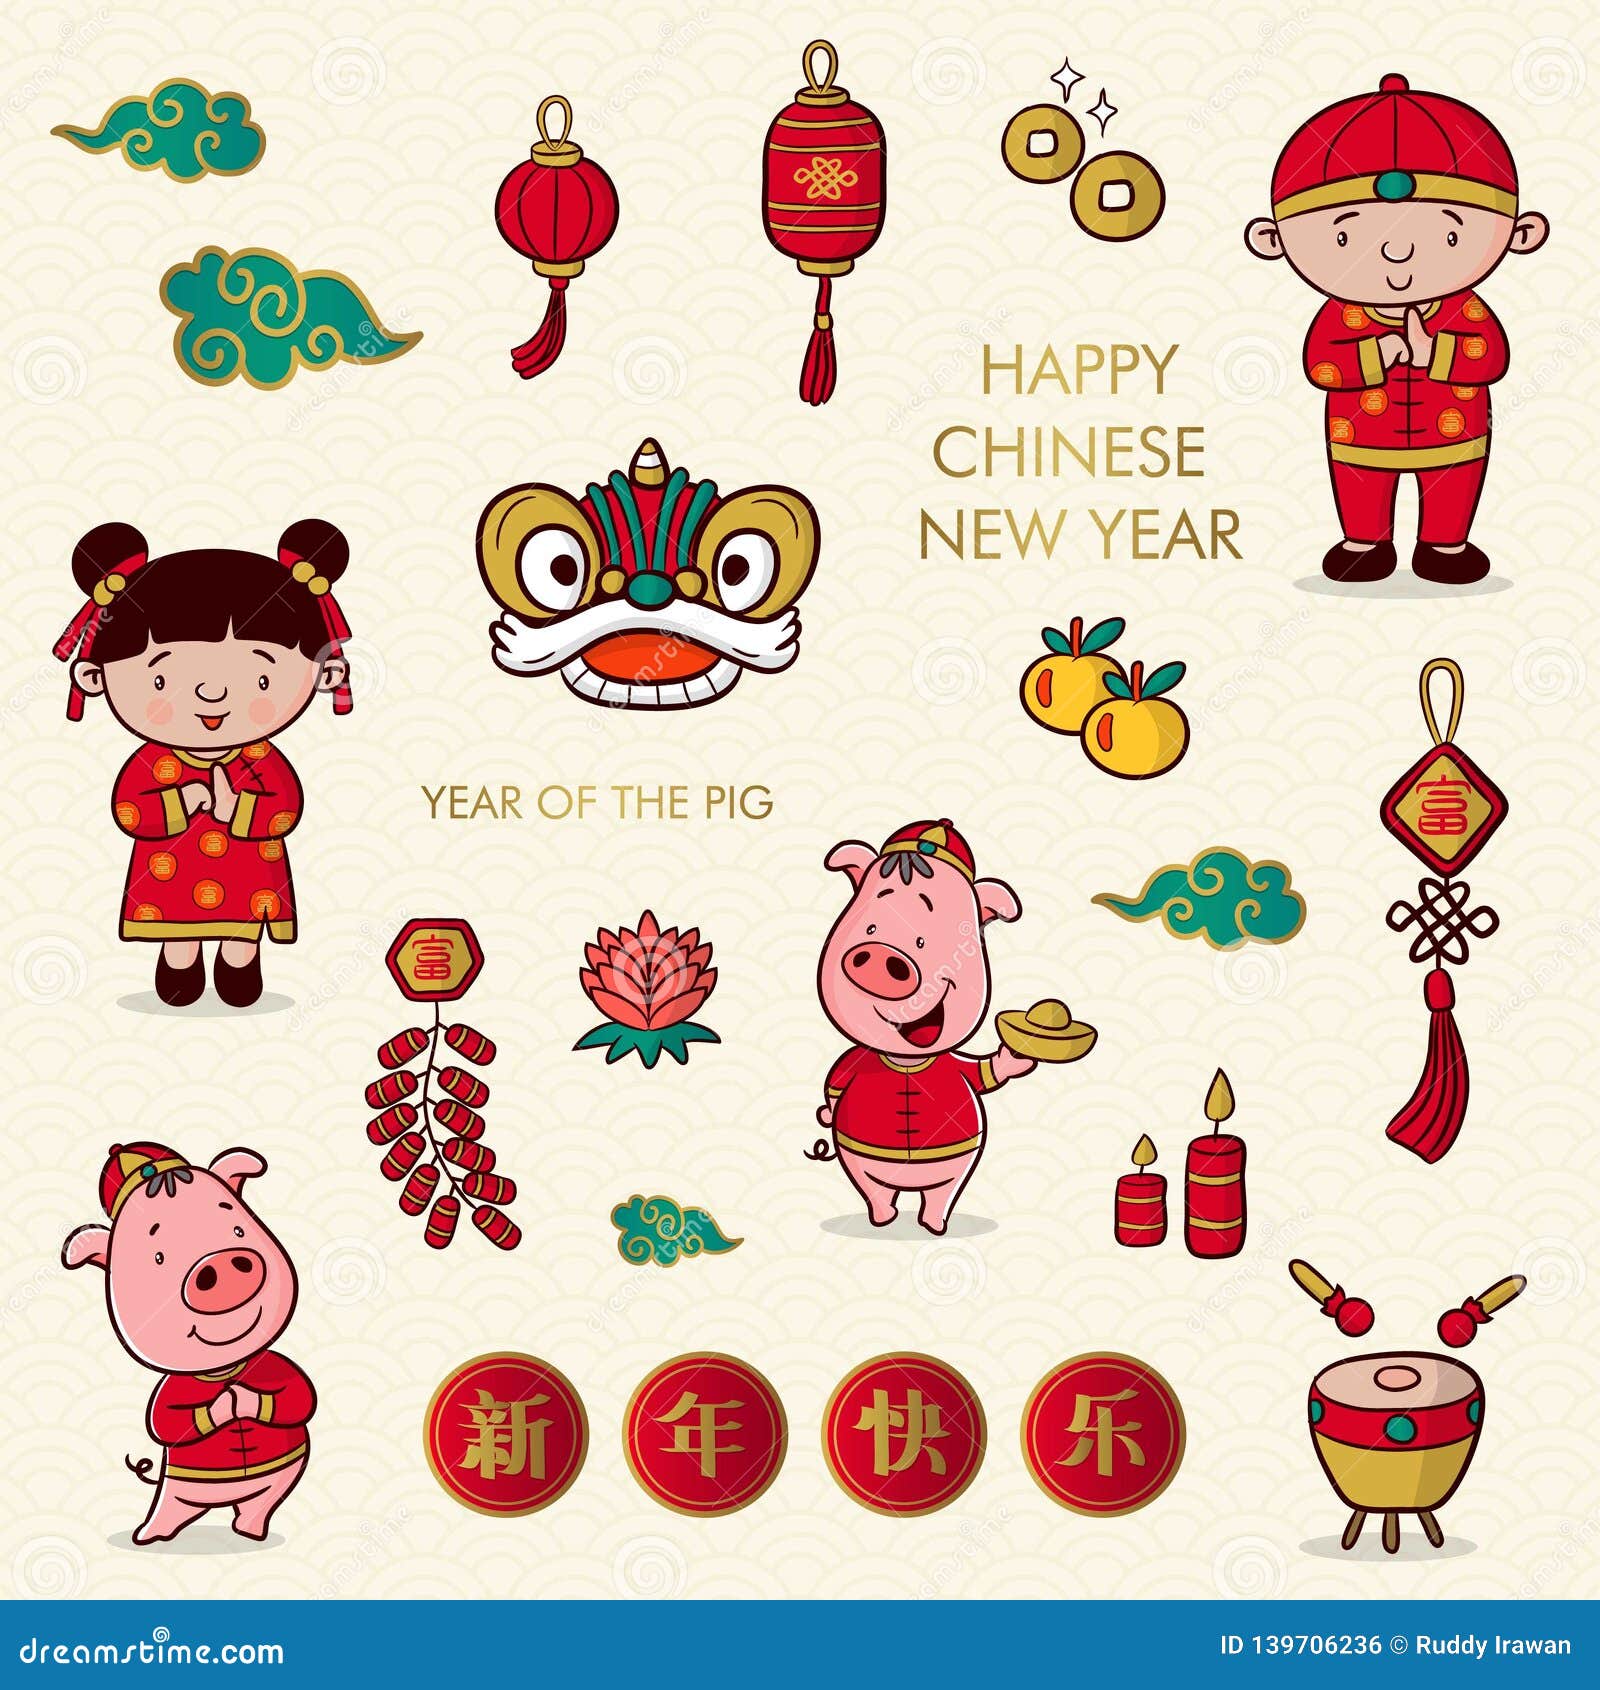 Cartoon Chinese New Year Stock Illustrations 36 225 Cartoon Chinese New Year Stock Illustrations Vectors Clipart Dreamstime